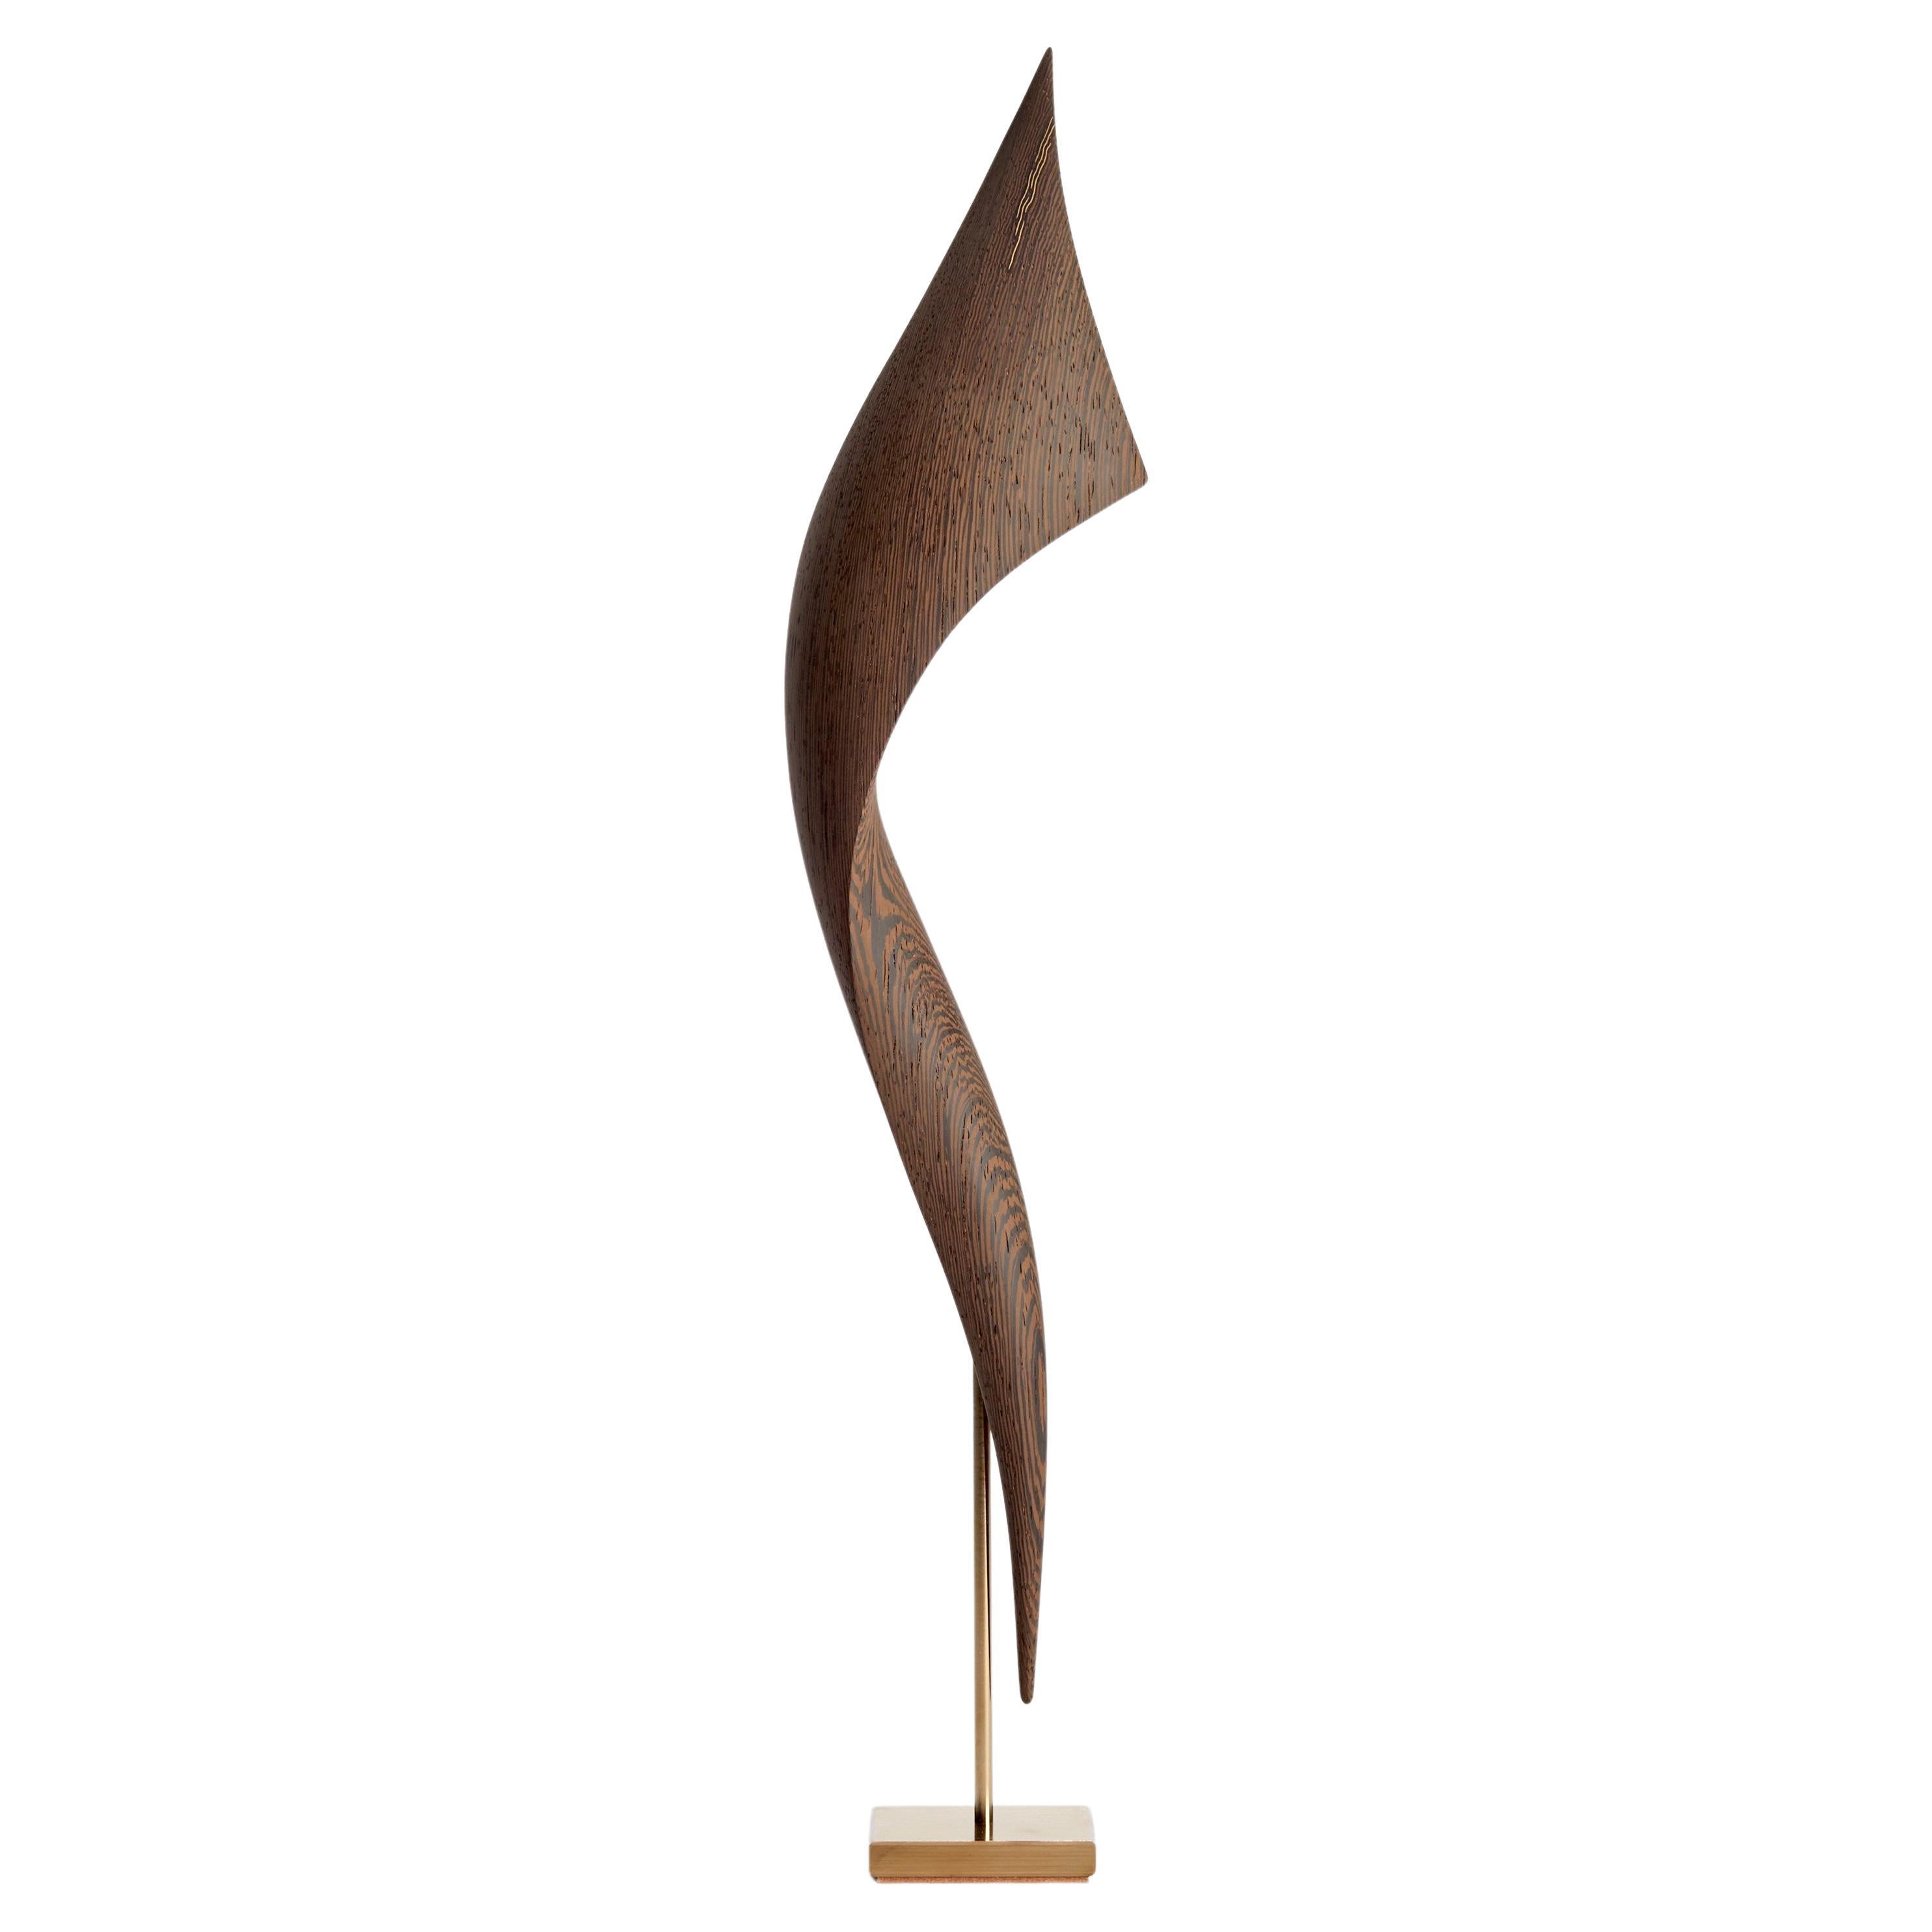  Flow Petit No 20, abstract fluid Wenge wood & gold mounted sculpture by Egeværk For Sale